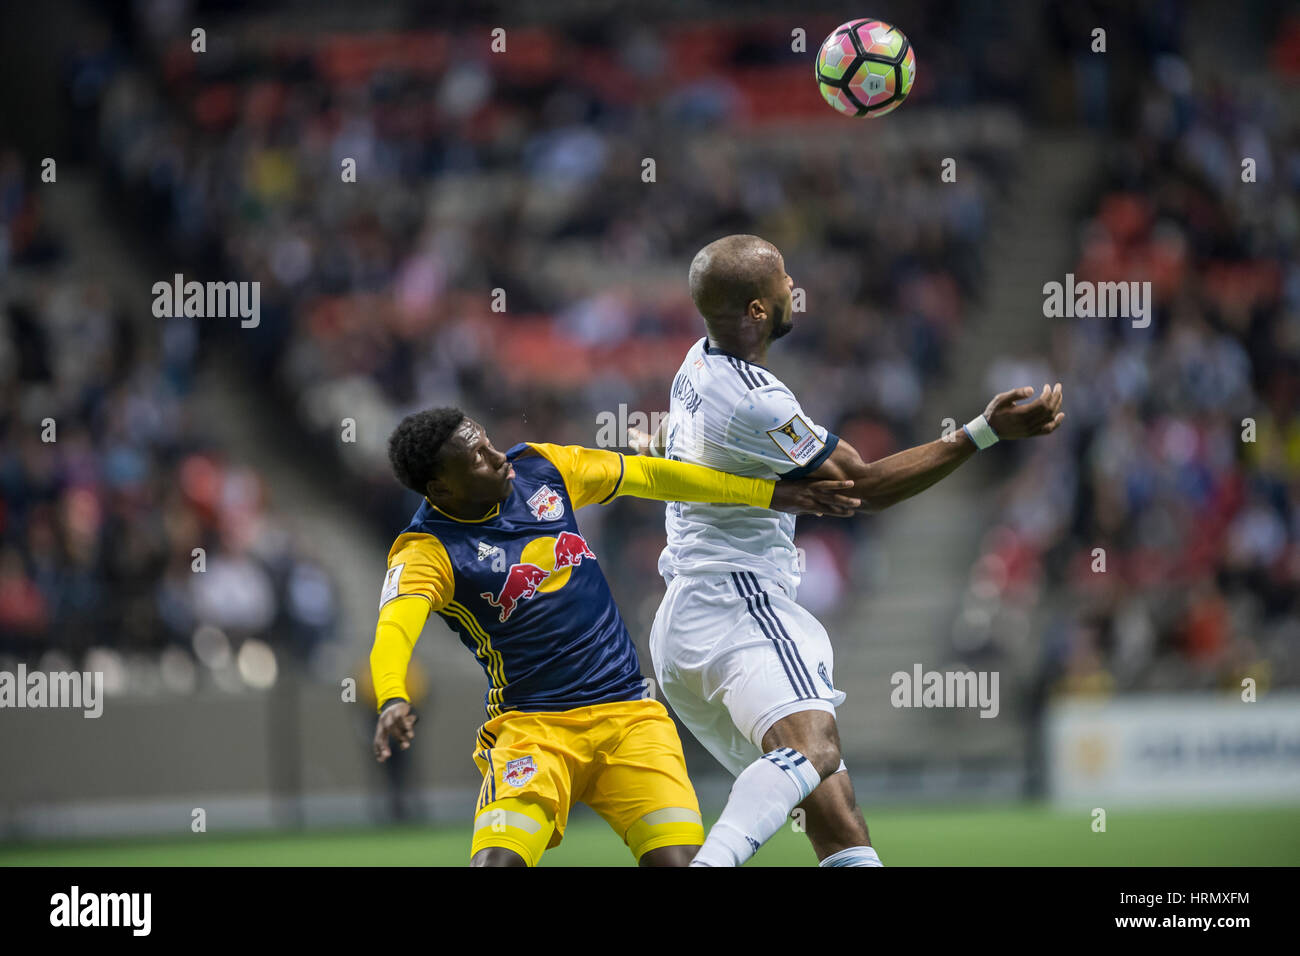 Vancouver, Canada. 2 March, 2017. Kendall Waston (4) of Vancouver Whitecaps, and Derrick Etienne (7) of New York Red Bulls in action for the ball. Concacaf Championship League 2016/17 Quarter Finals between Vancouver Whitecaps and New York Red Bulls, BC Place. Vancouver defeats New York 2-0, and advances to the semi-finals.© Gerry Rousseau/Alamy Live News Stock Photo